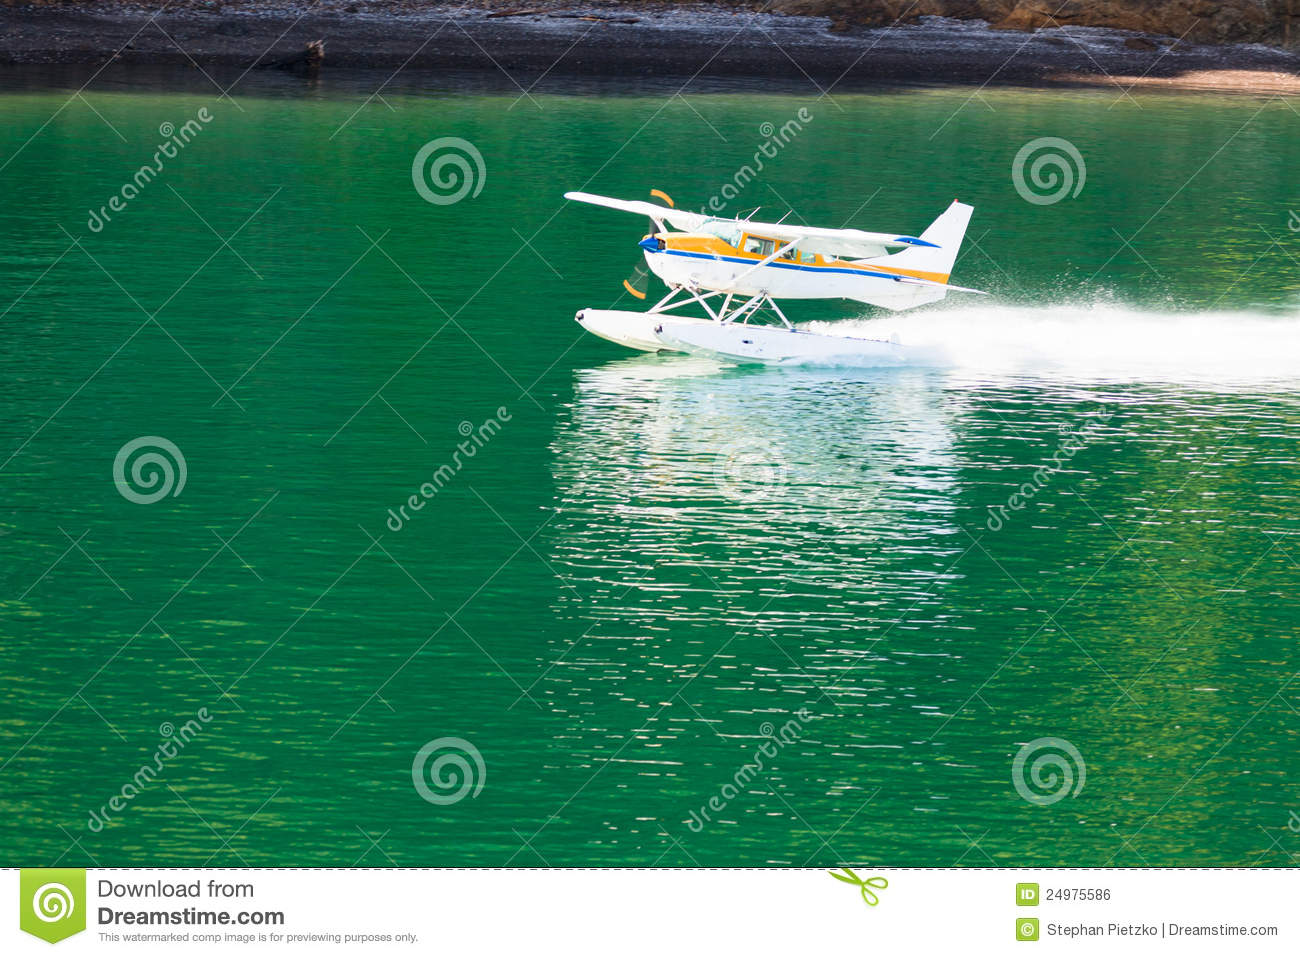 Aircraft Seaplane Taking Off On Calm Water Of Lake Royalty Free Stock